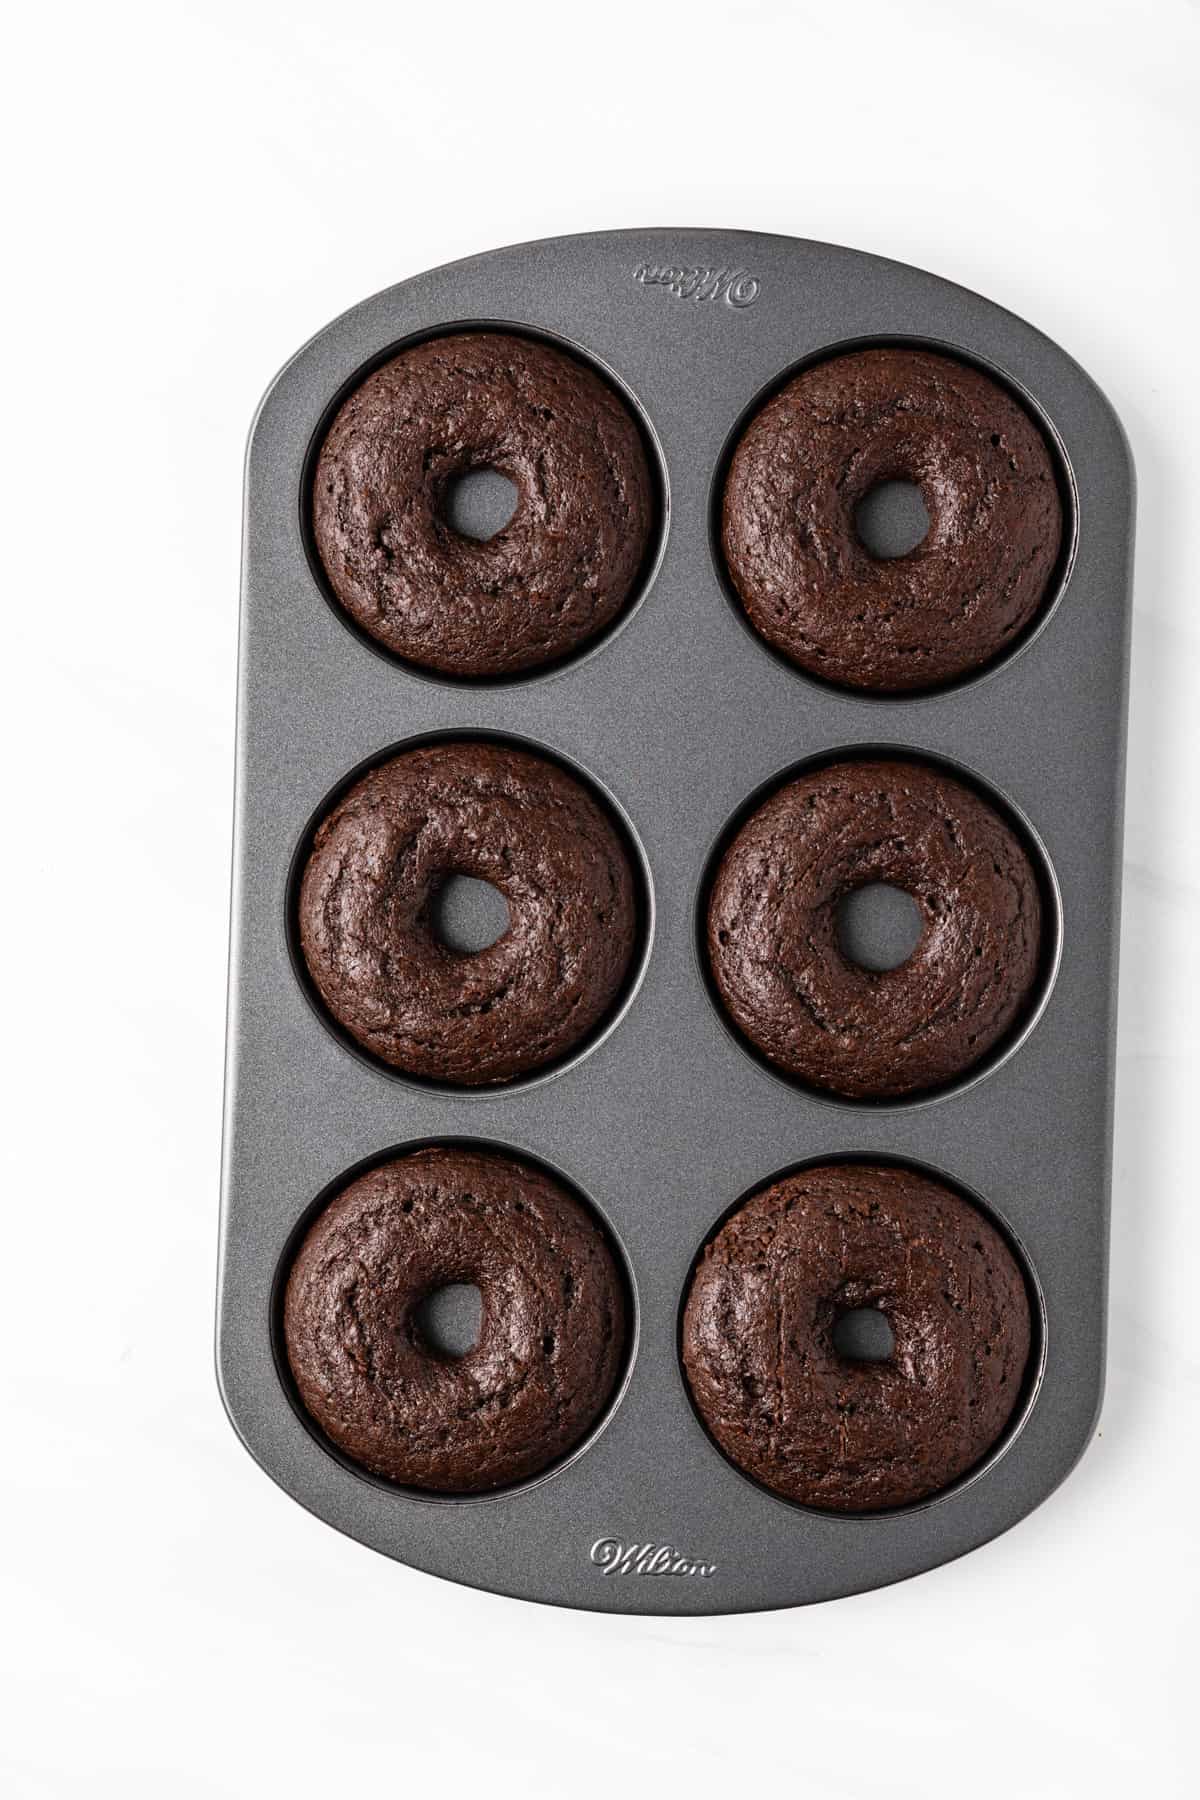 Baked chocolate donuts in a donut pan